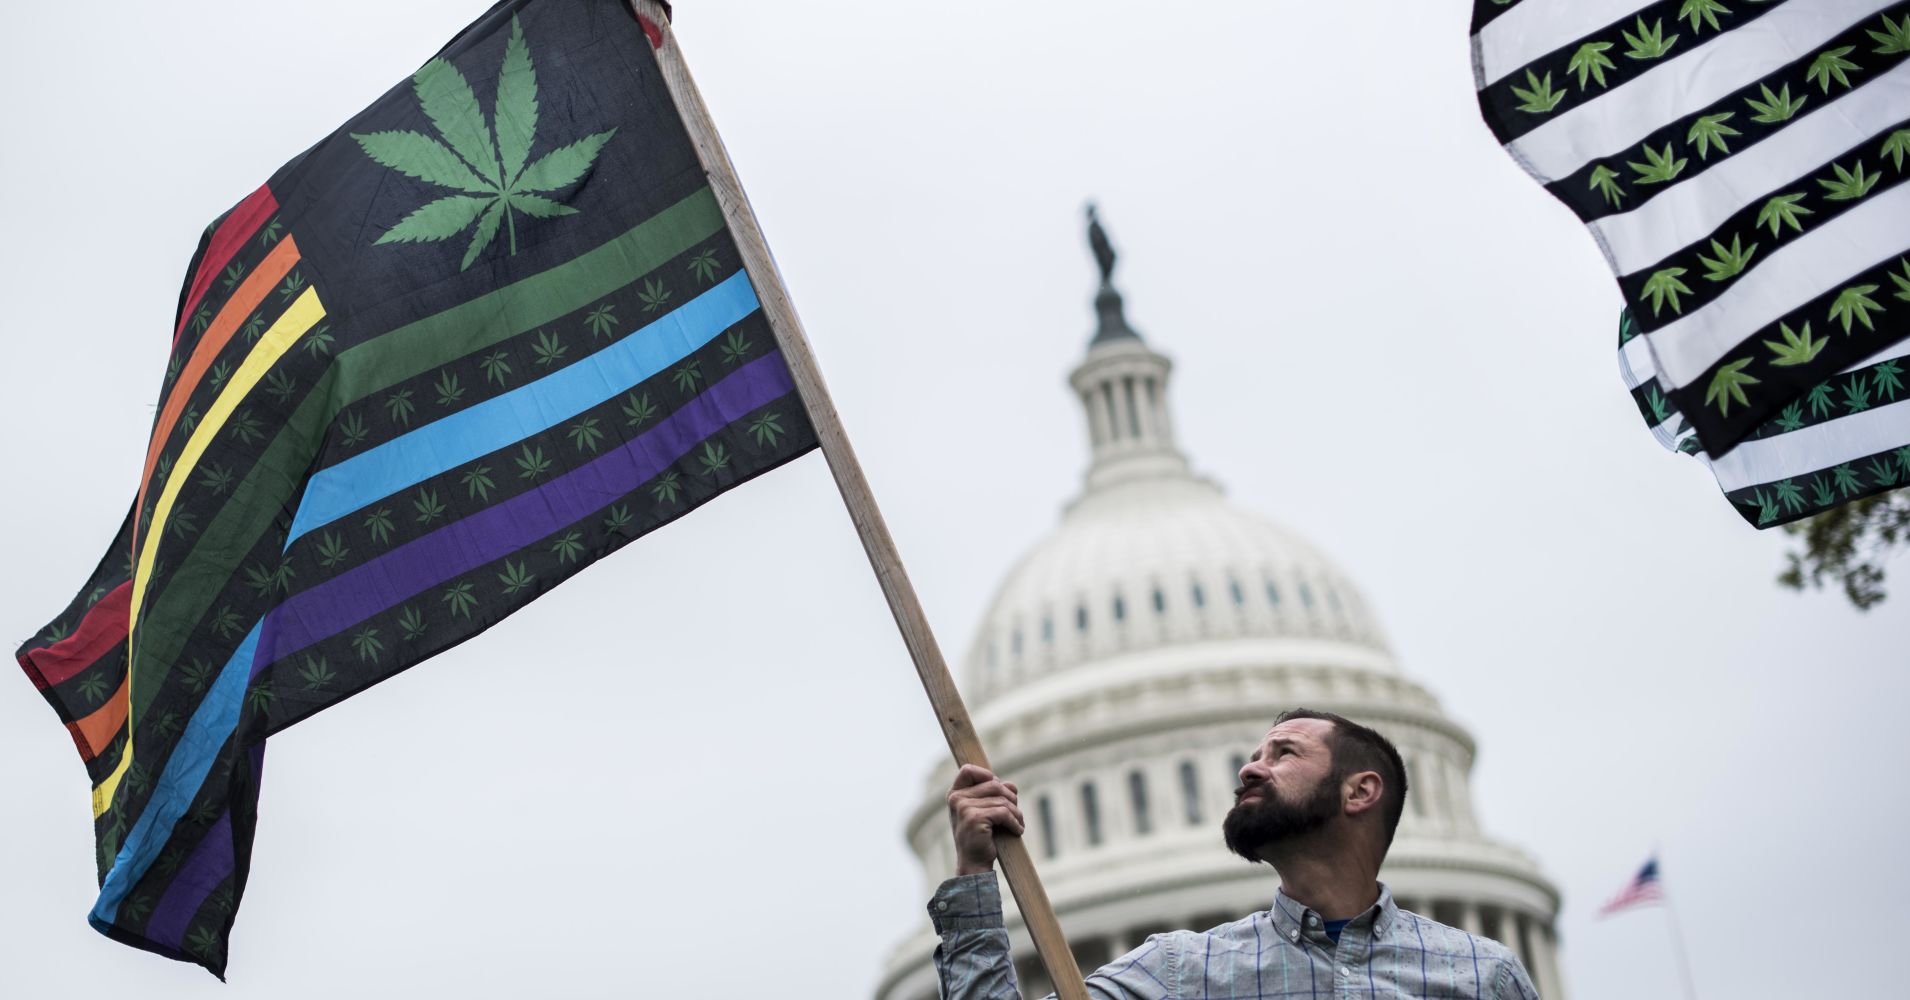 Here are 6 things you need to know about Washington DC's fuzzy market for legal pot